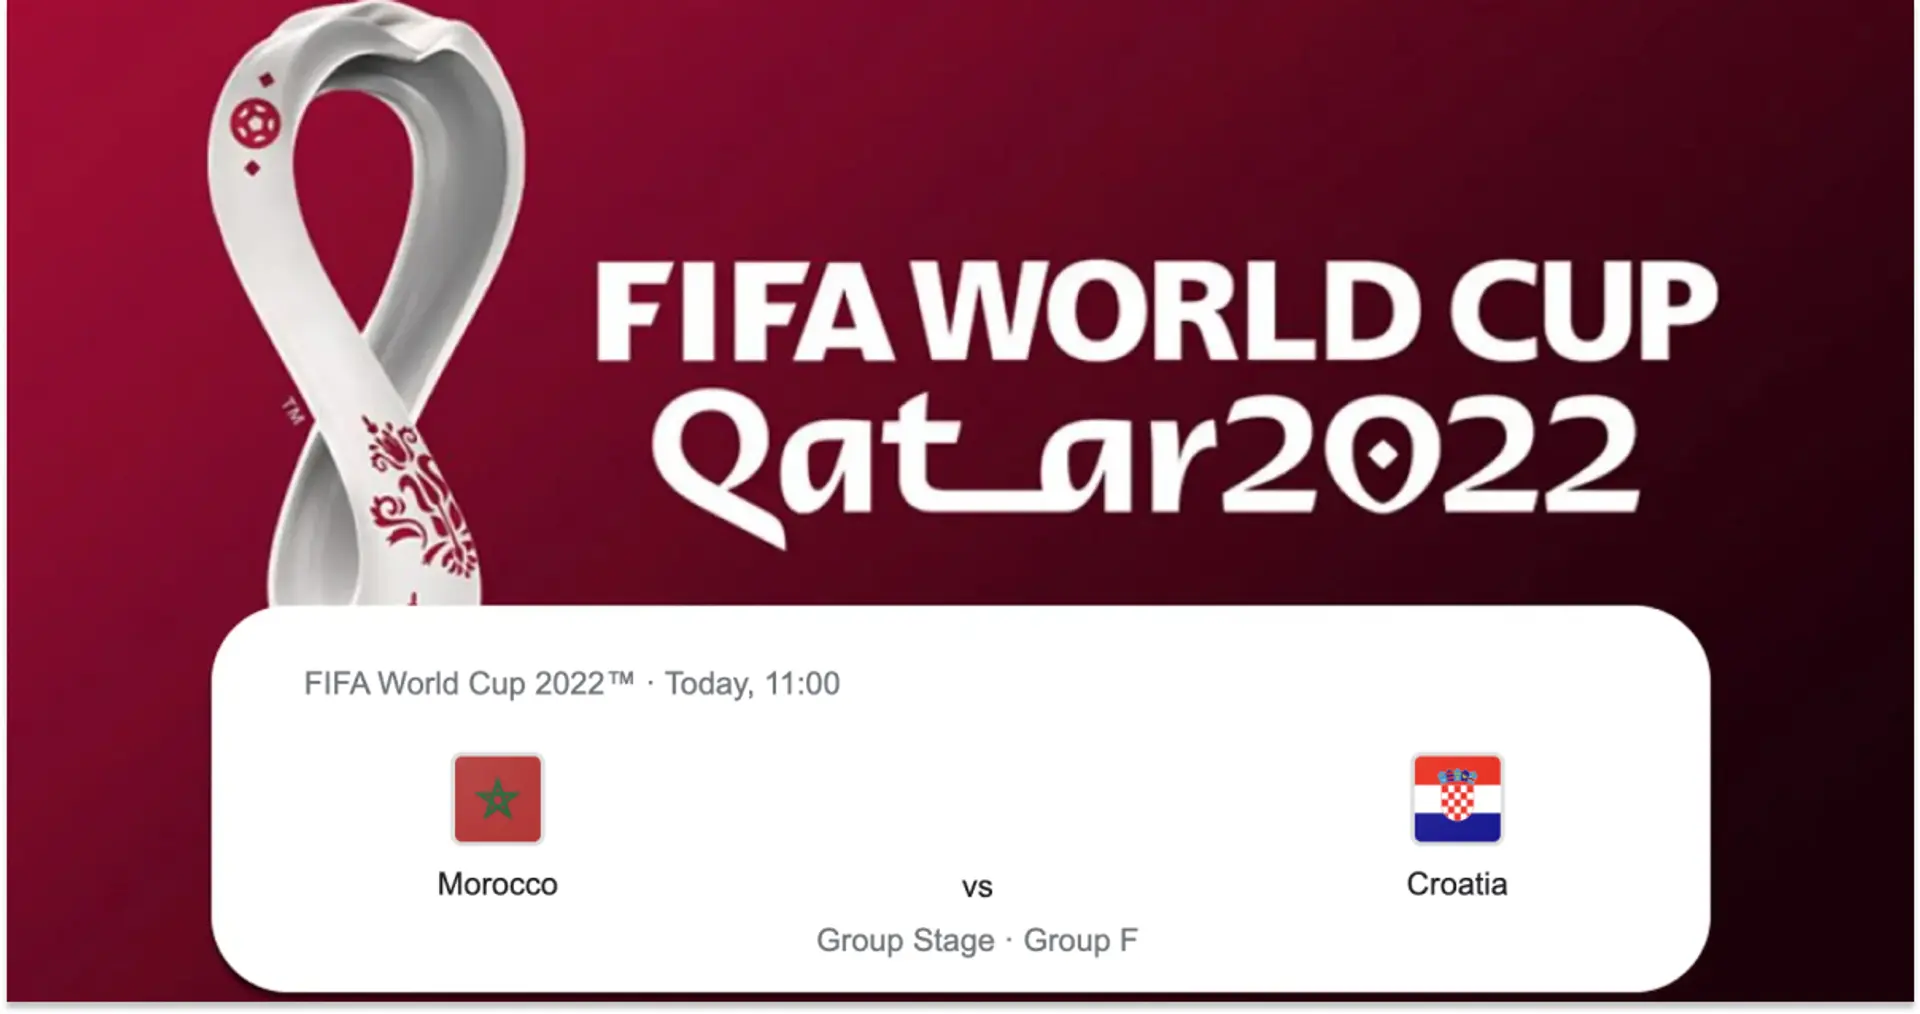 Morocco vs Croatia: Official team lineups for the World Cup clash revealed